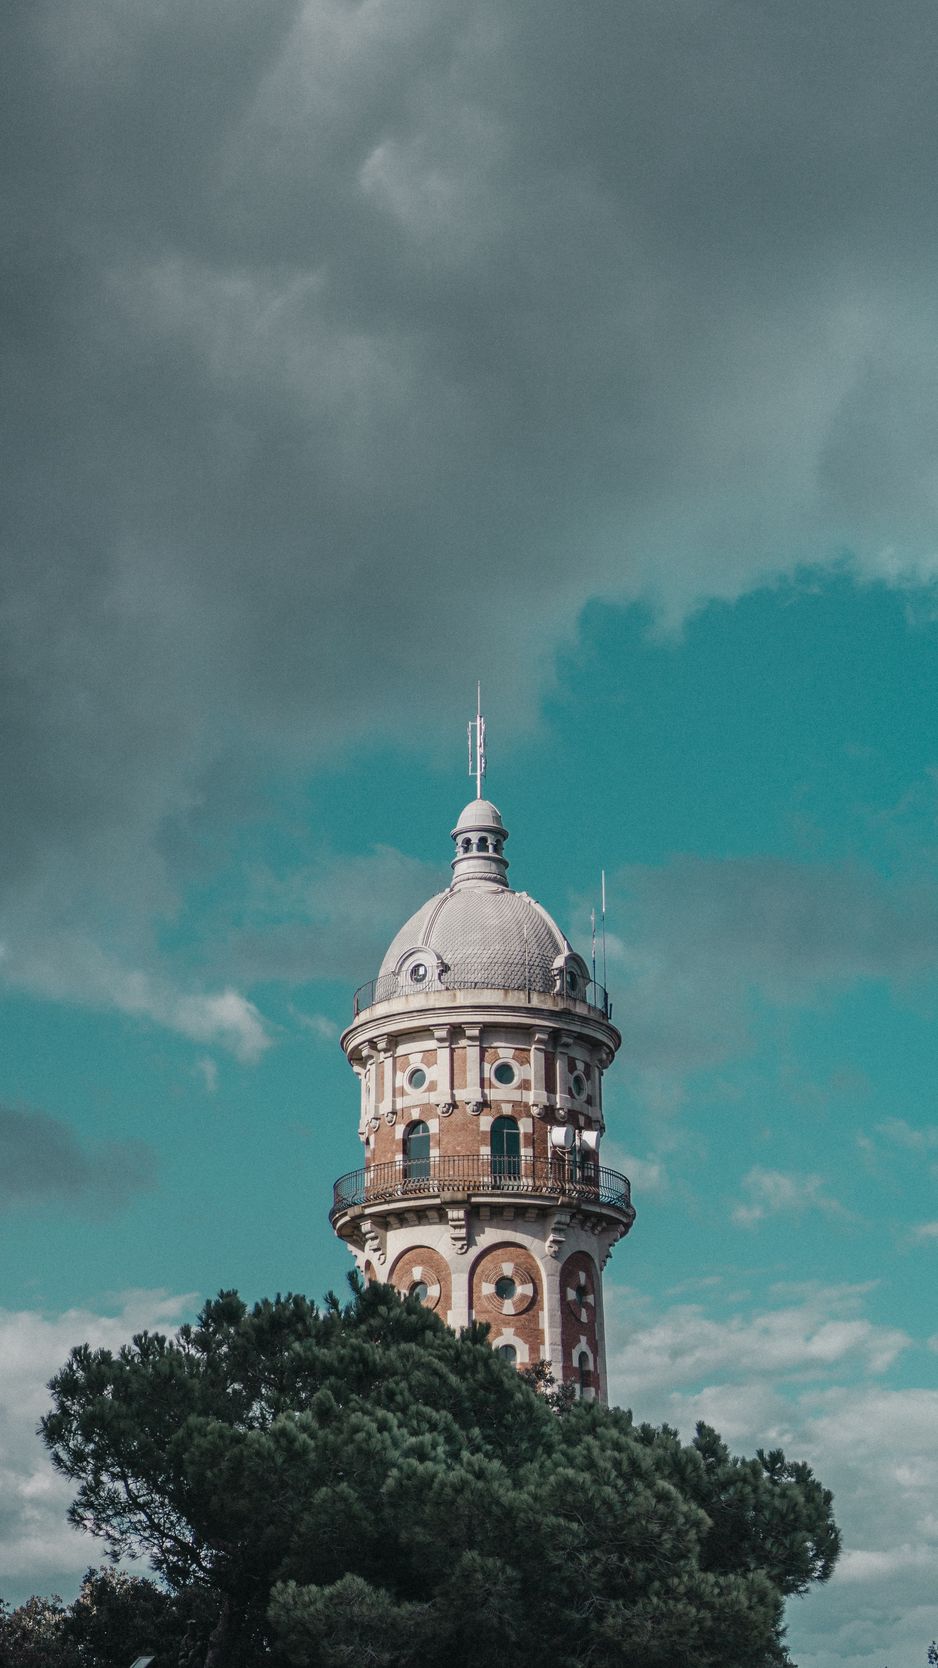 Download wallpaper 938x1668 tower, clouds, trees, barcelona, spain iphone  8/7/6s/6 for parallax hd background